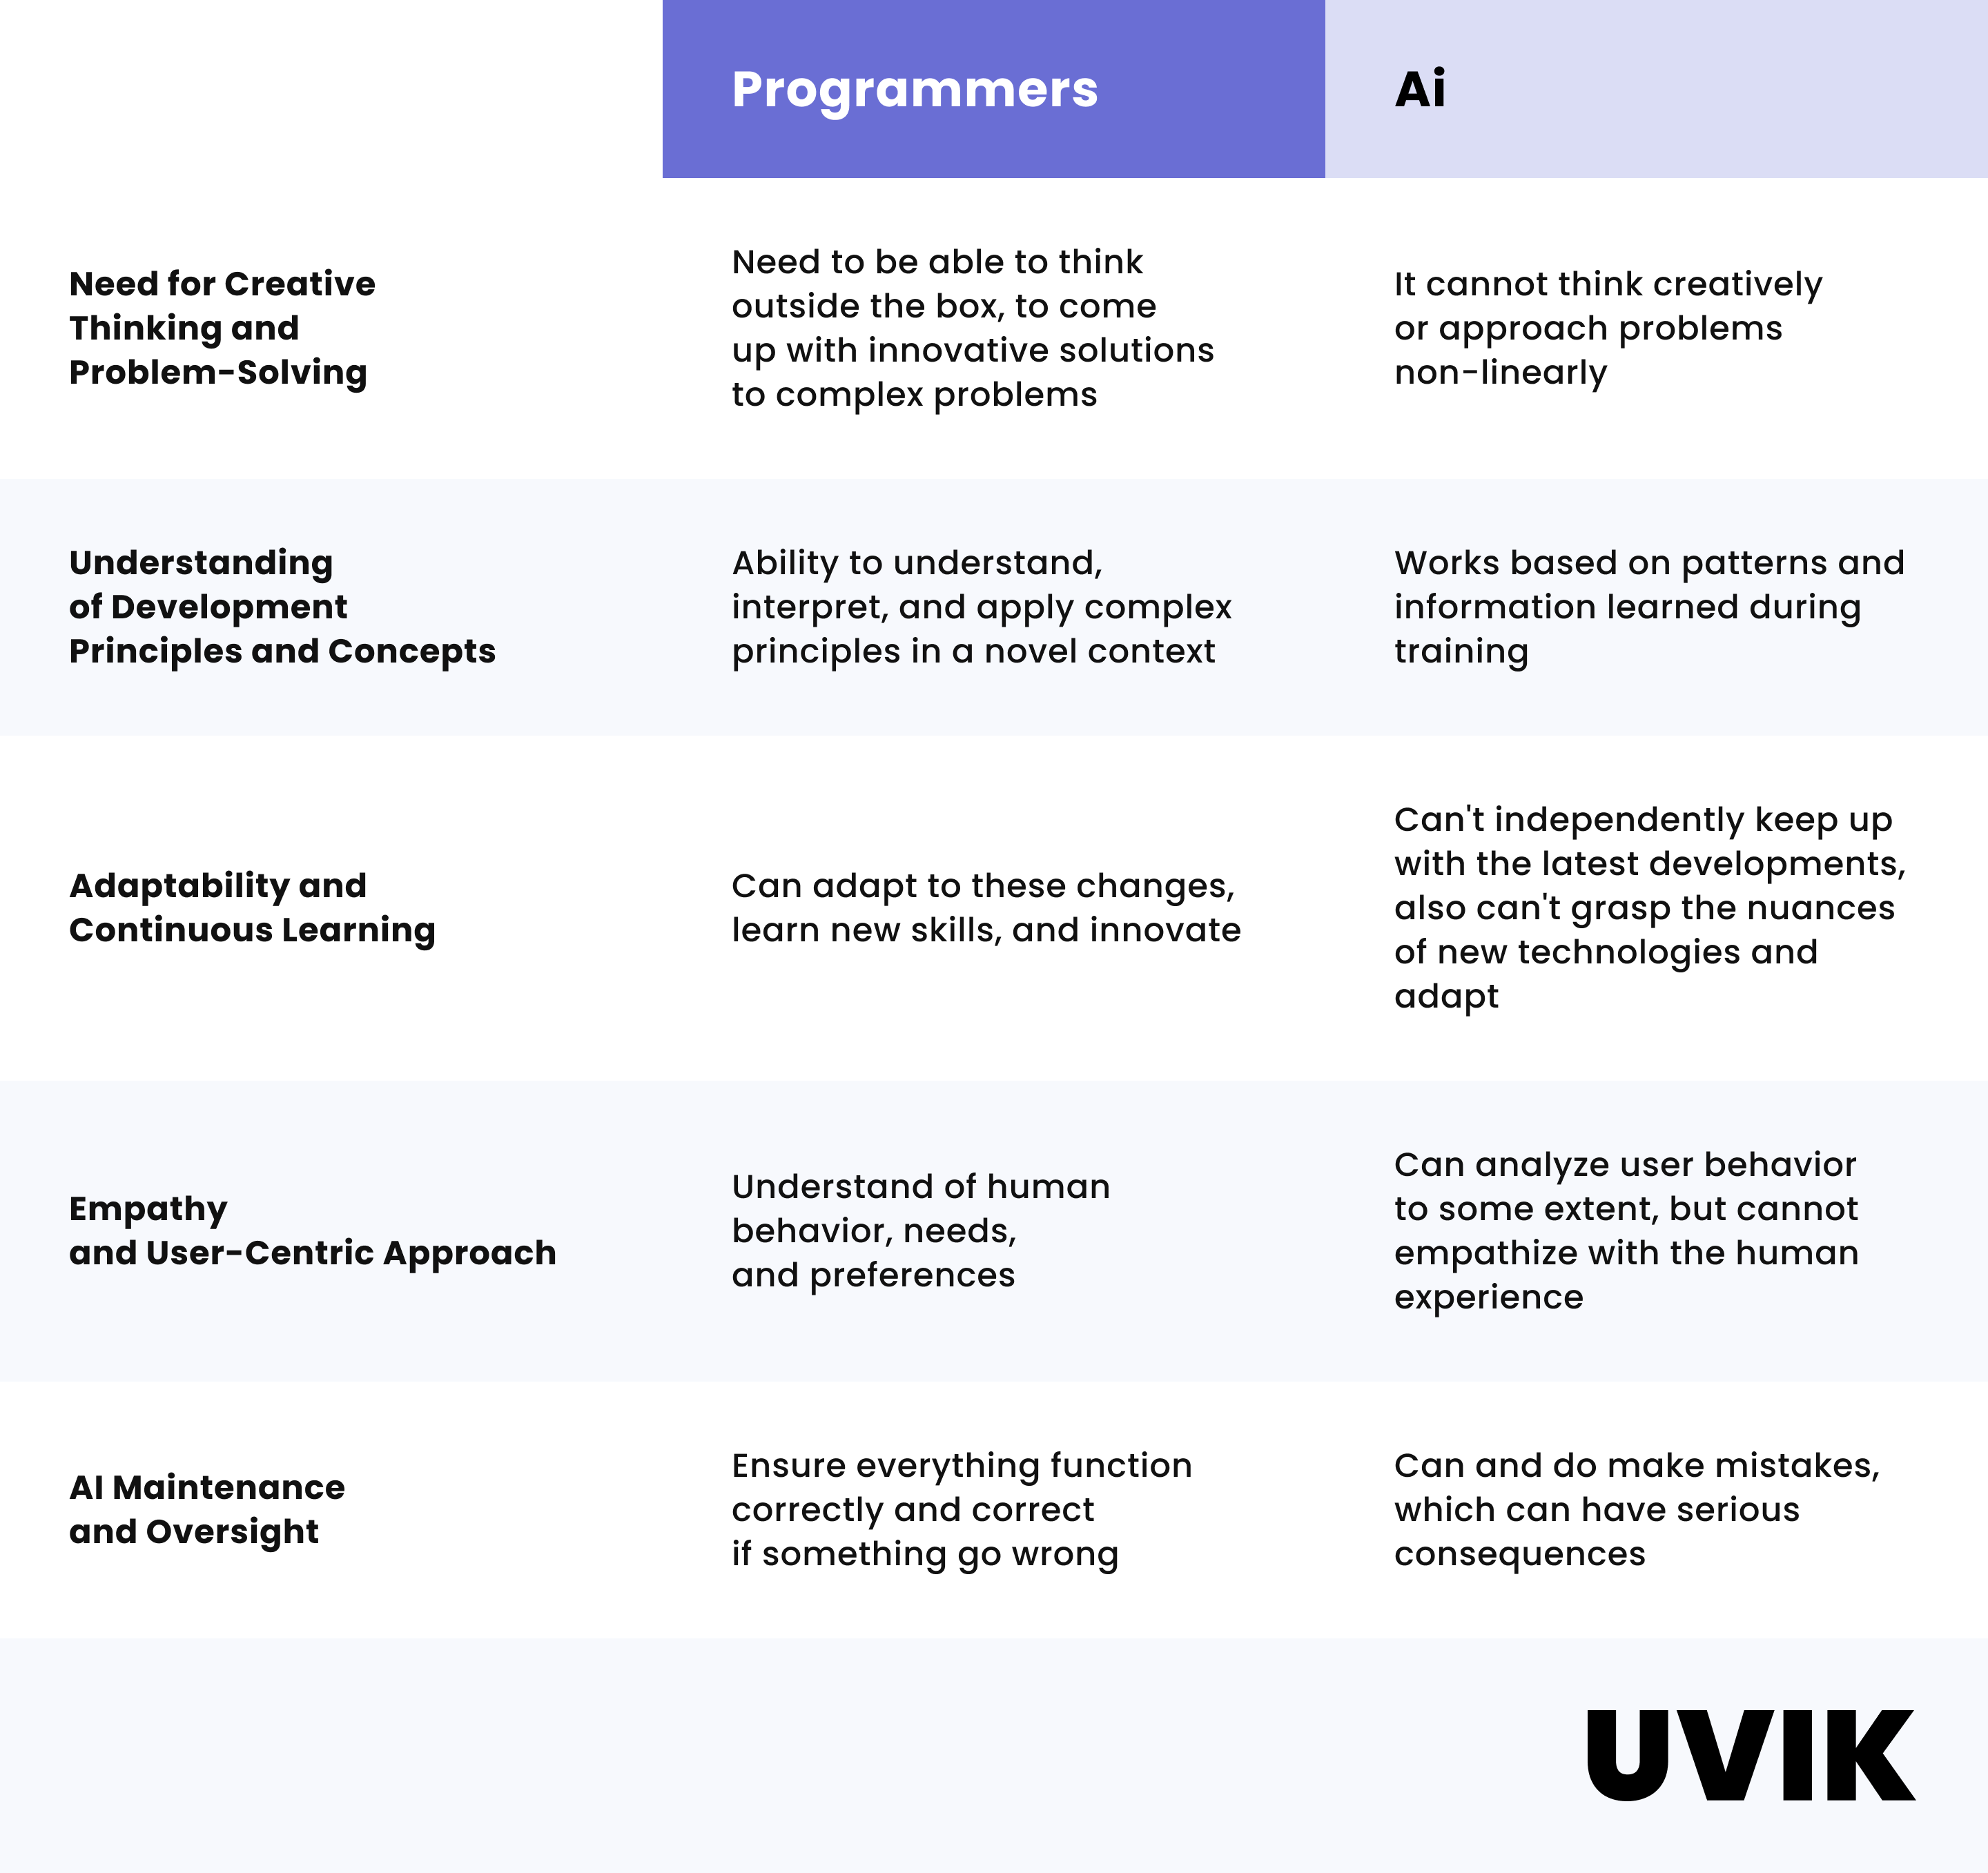 Will AI Replace Programmers? The Future of Programming | Uvik - 3